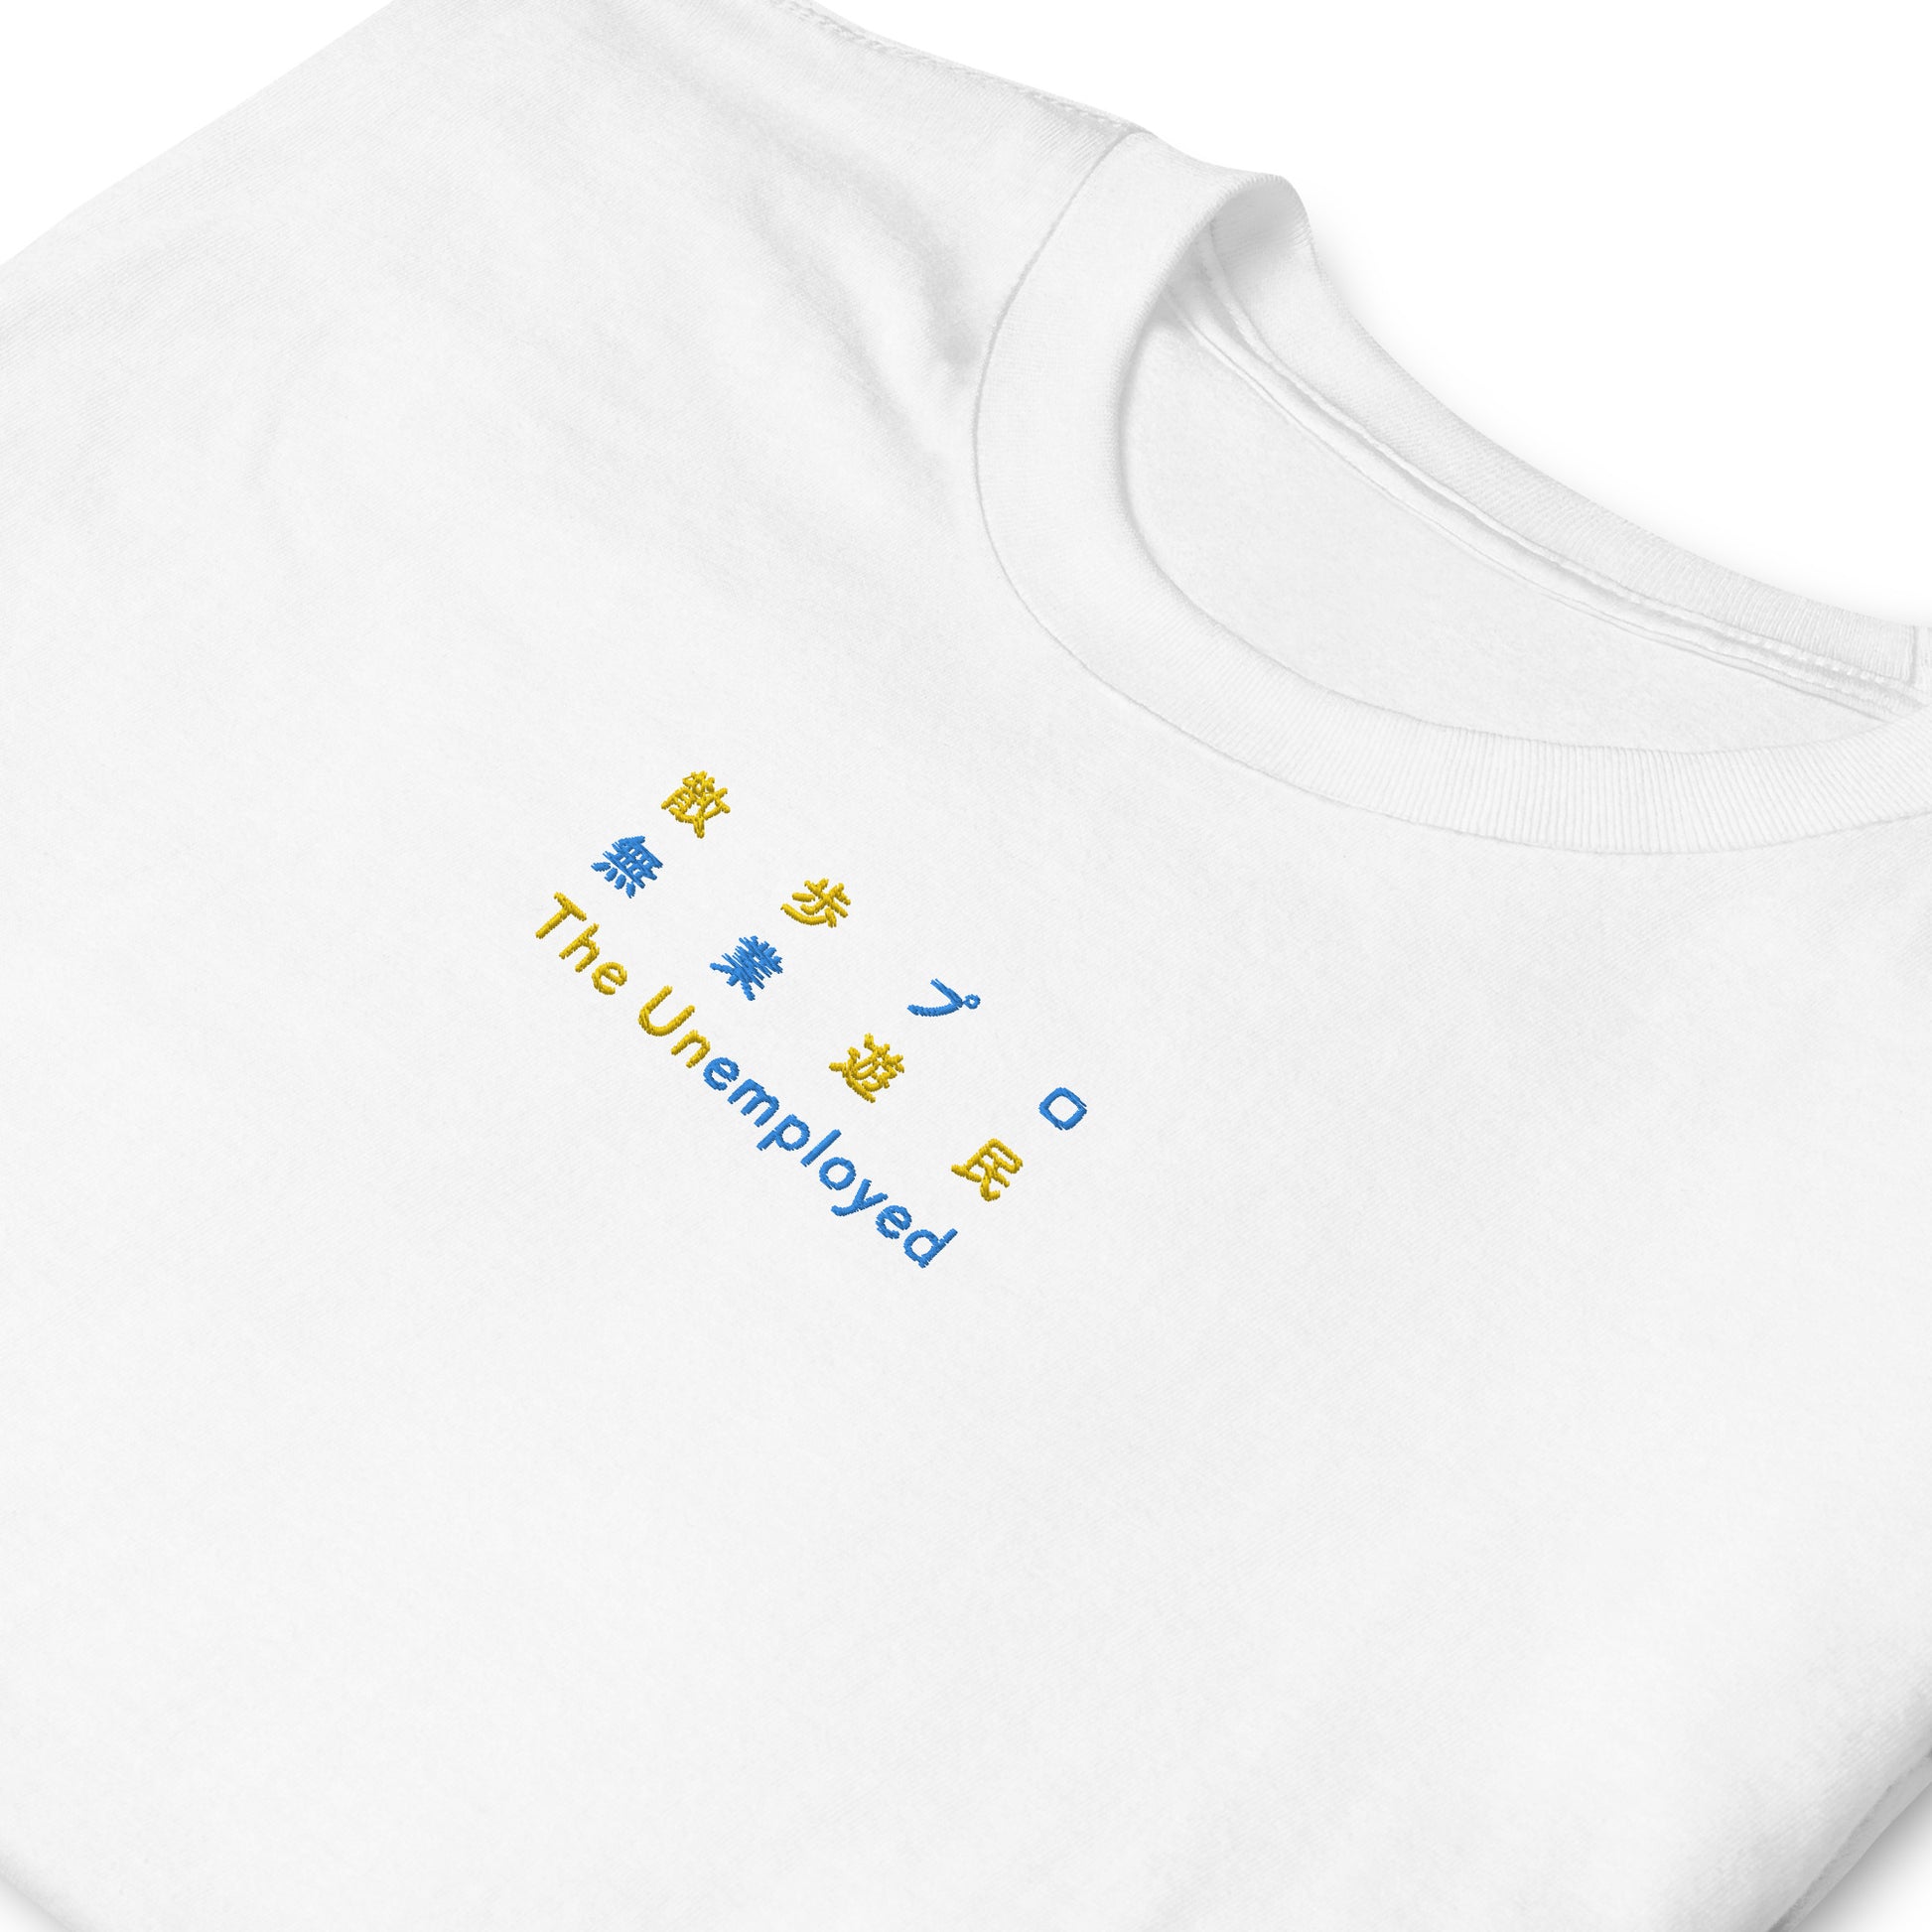 White High Quality Tee - Front Design with Yellow/Blue Embroidery "The Unemployed" in three languages